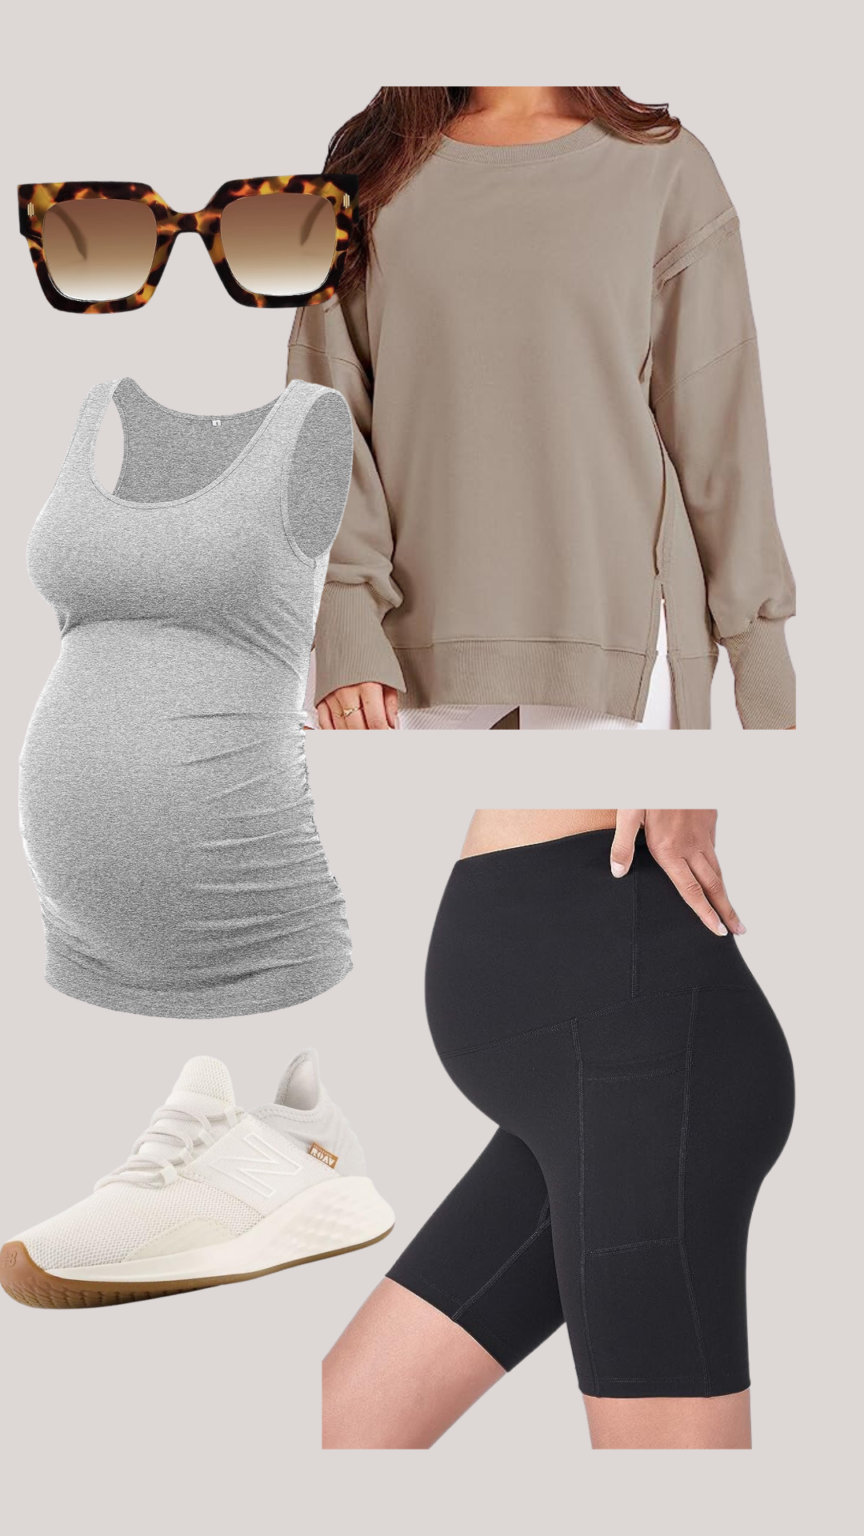 4 Maternity Outfits for the End of Summer - Life in Classic